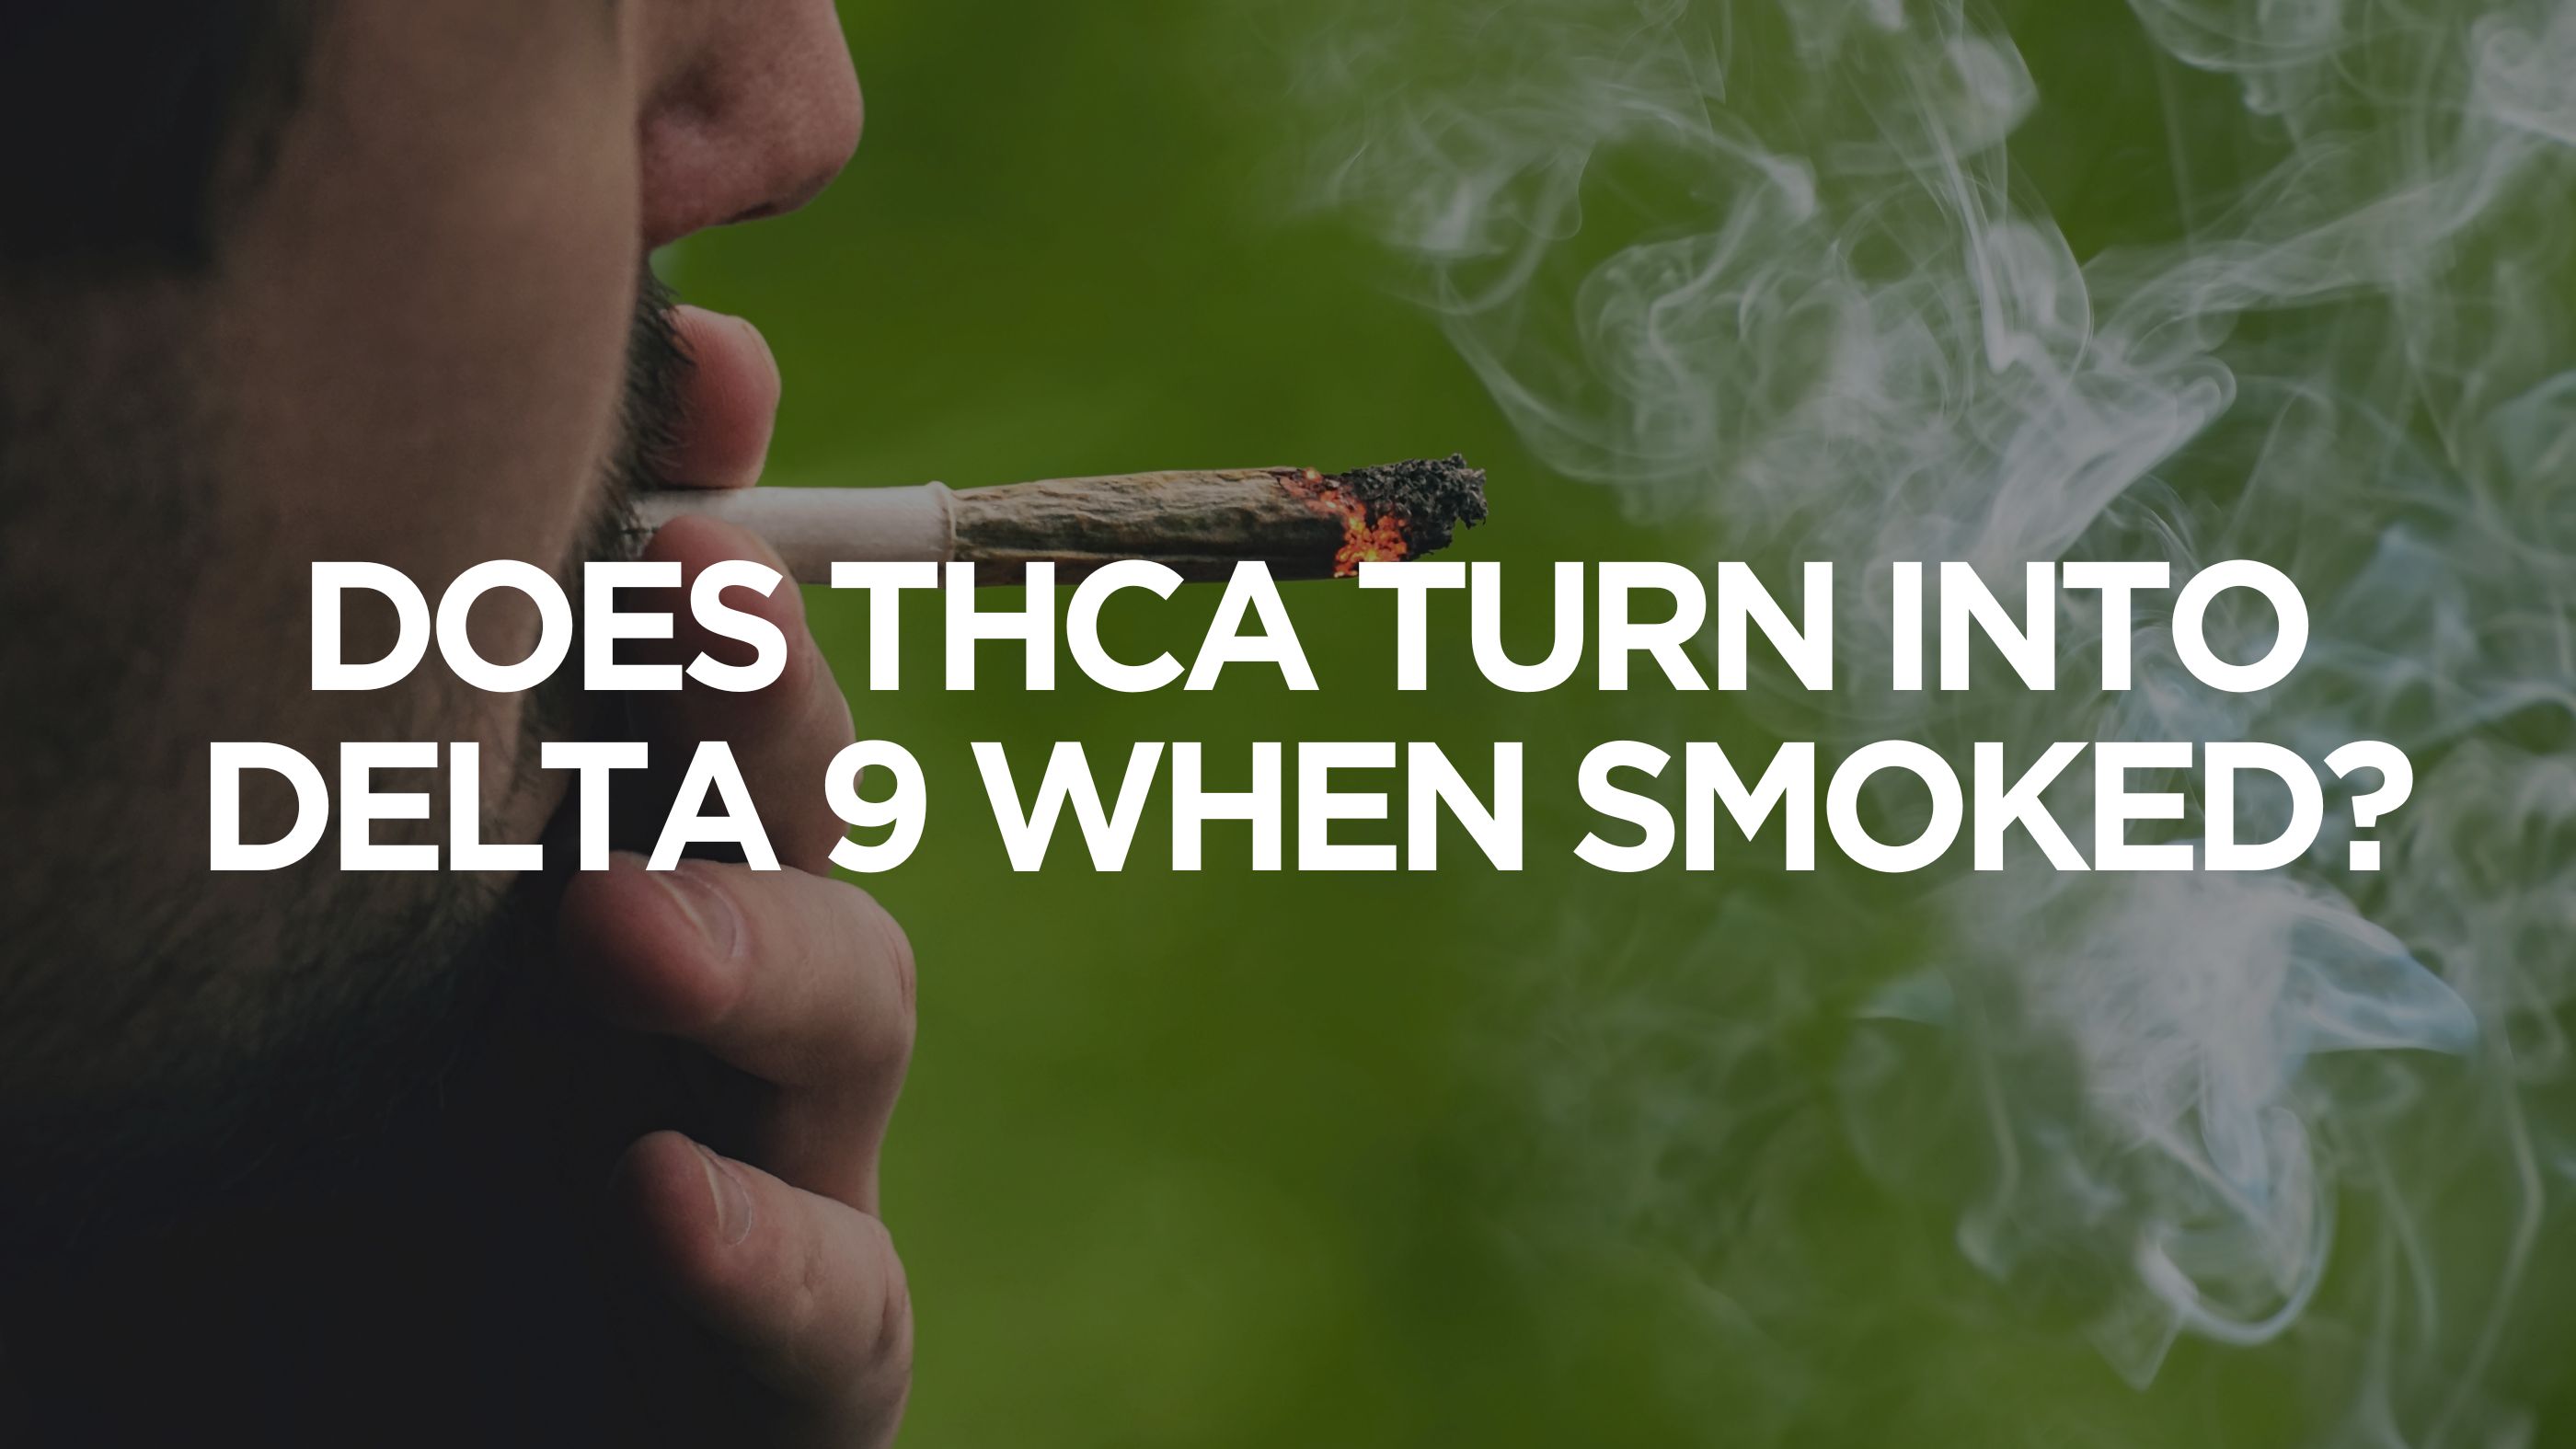 Does THCA Turn Into Delta 9 When Smoked?